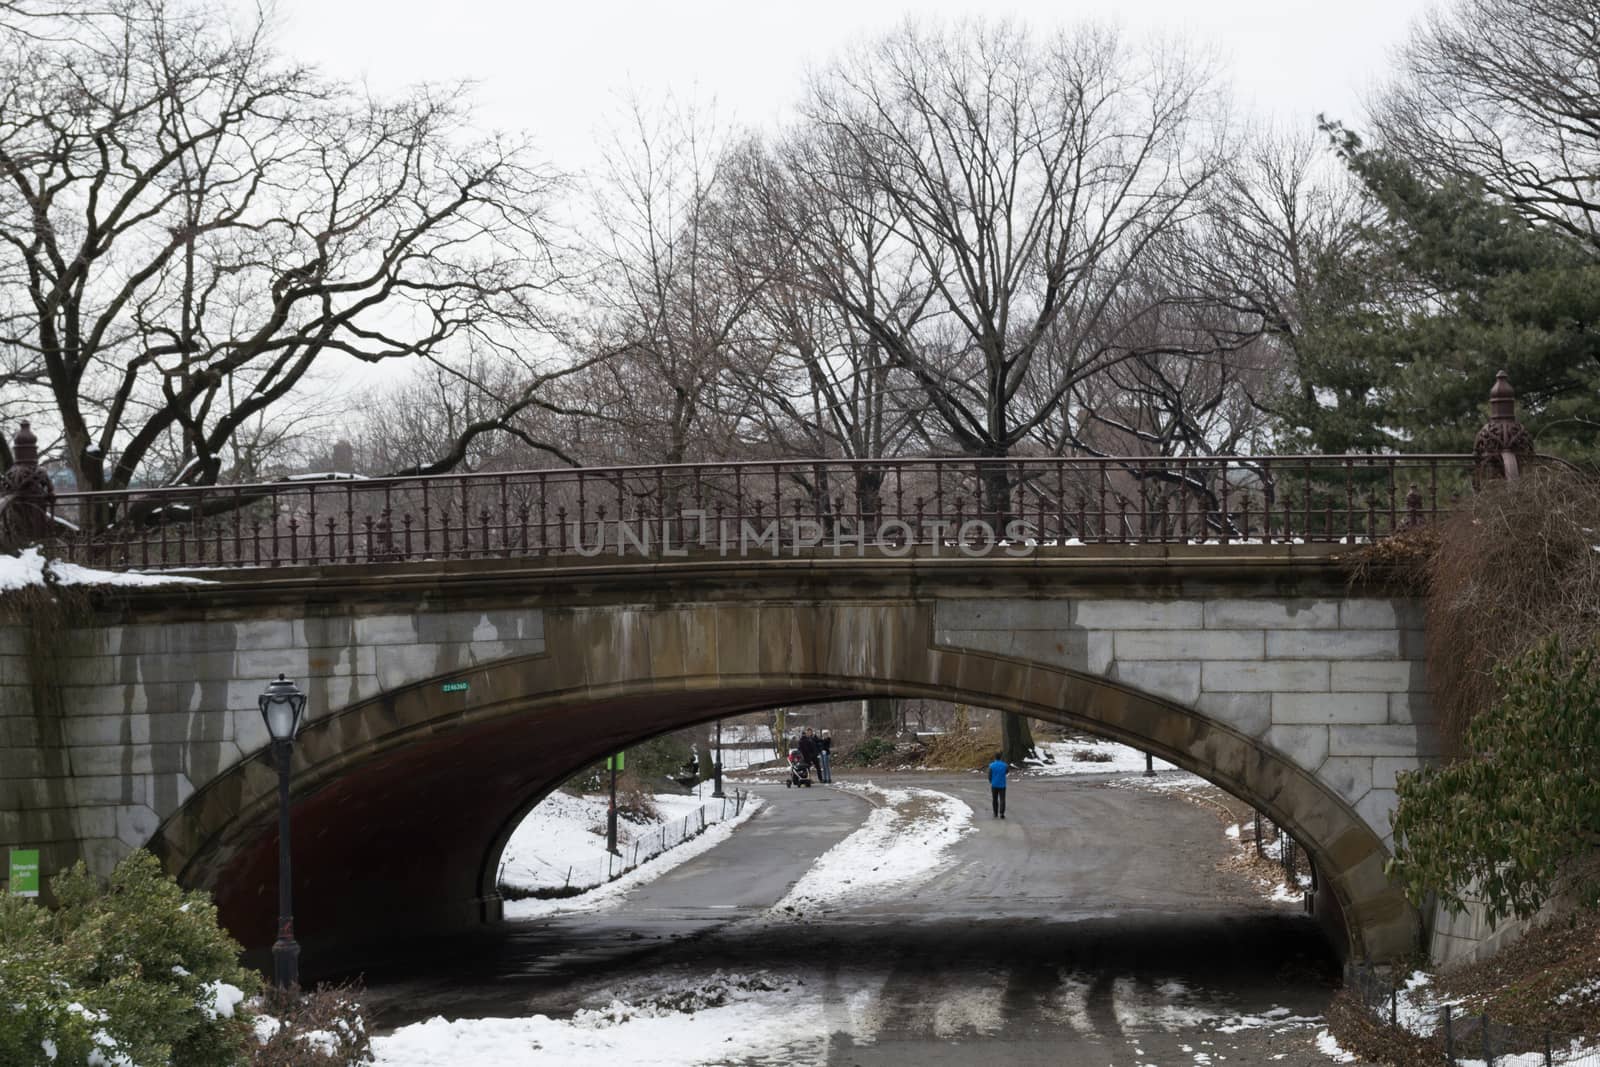 The Winterdale arch was completed in 1862 and is one of the many bridges that you can find in Central park